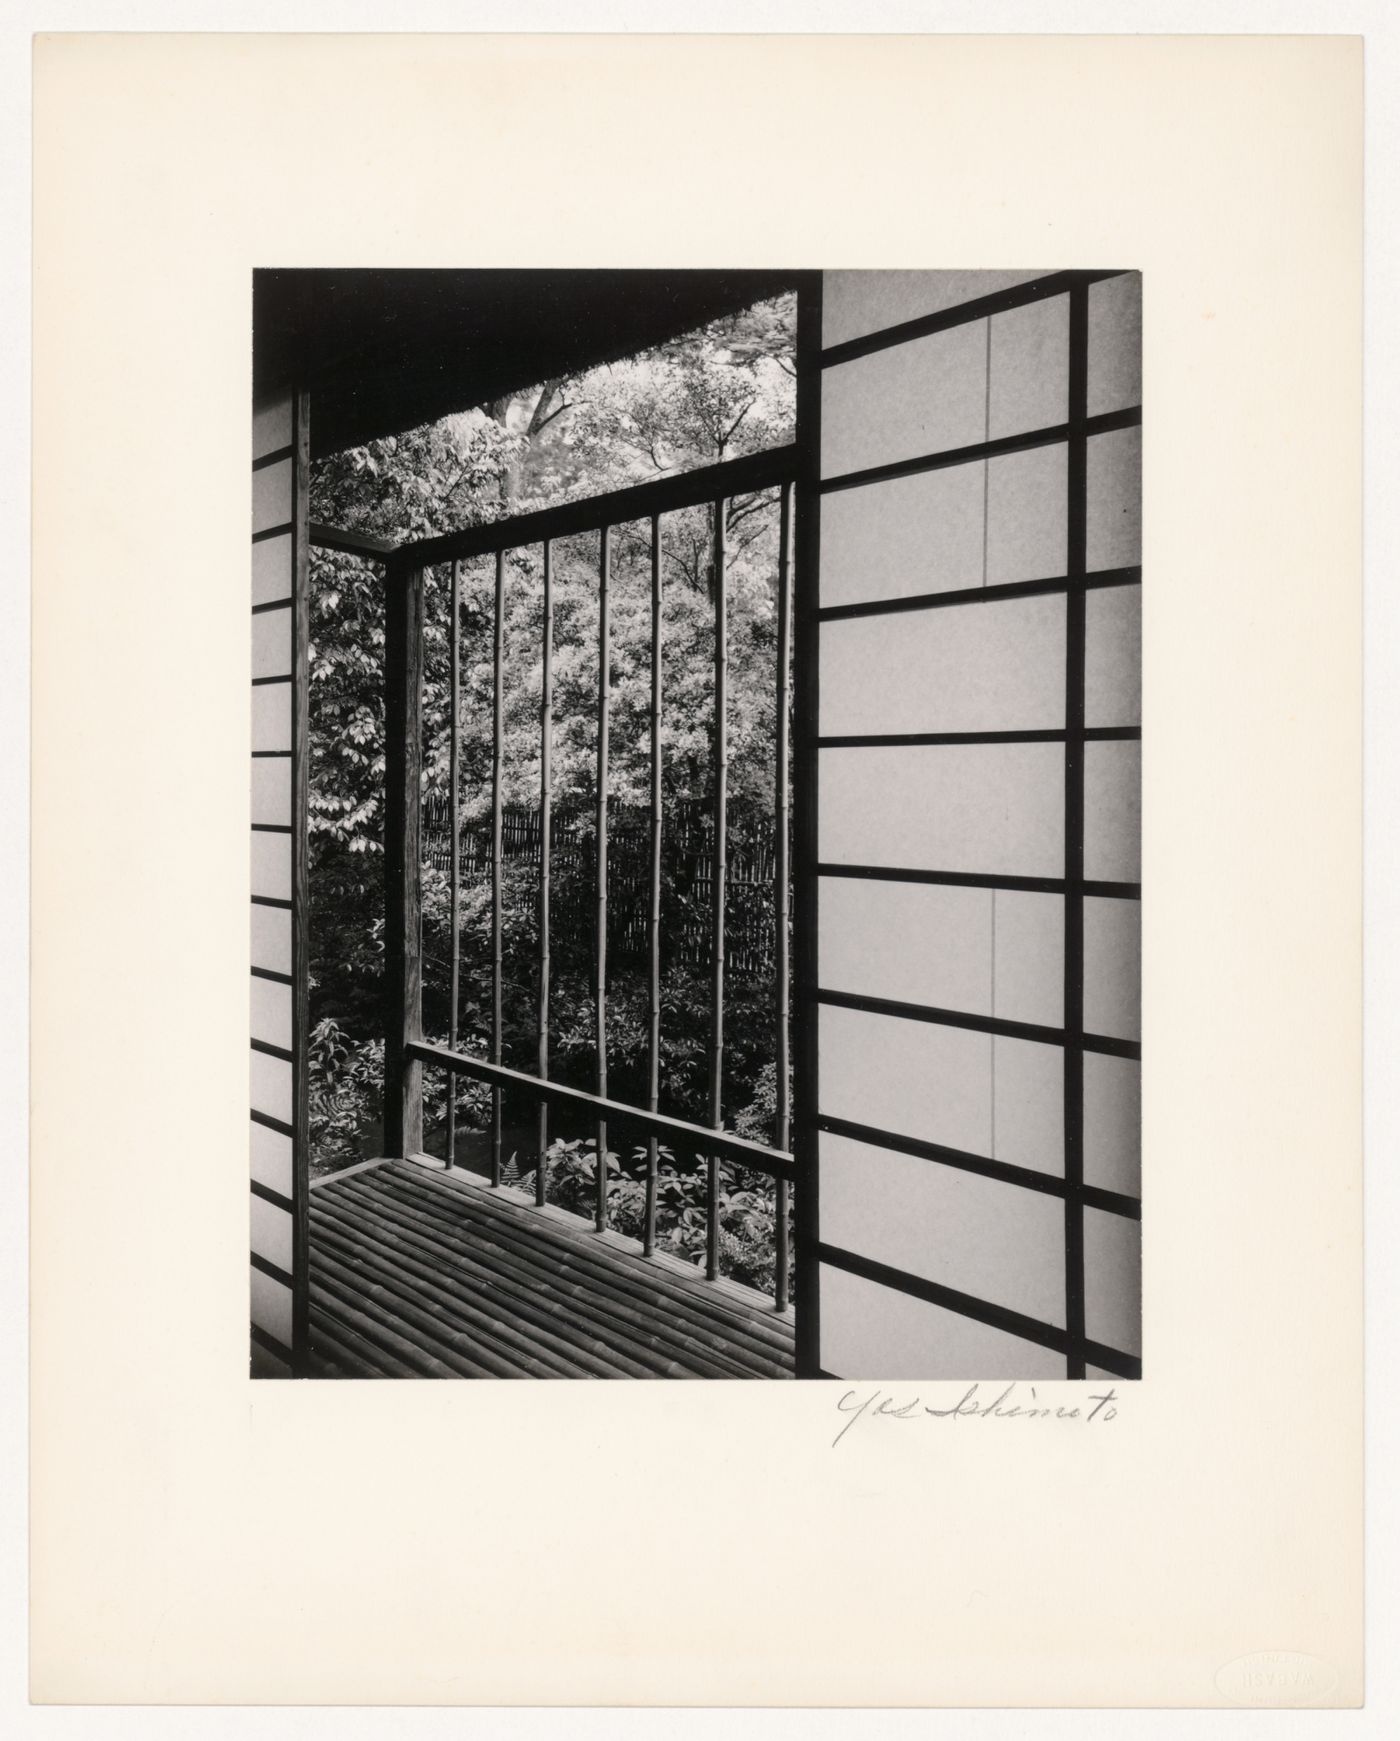 View of the doorway and the bamboo veranda on the south side of the Third Room (also known as the Anteroom) of the Shoiken, Katsura Rikyu (also known as Katsura Imperial Villa), Kyoto, Japan